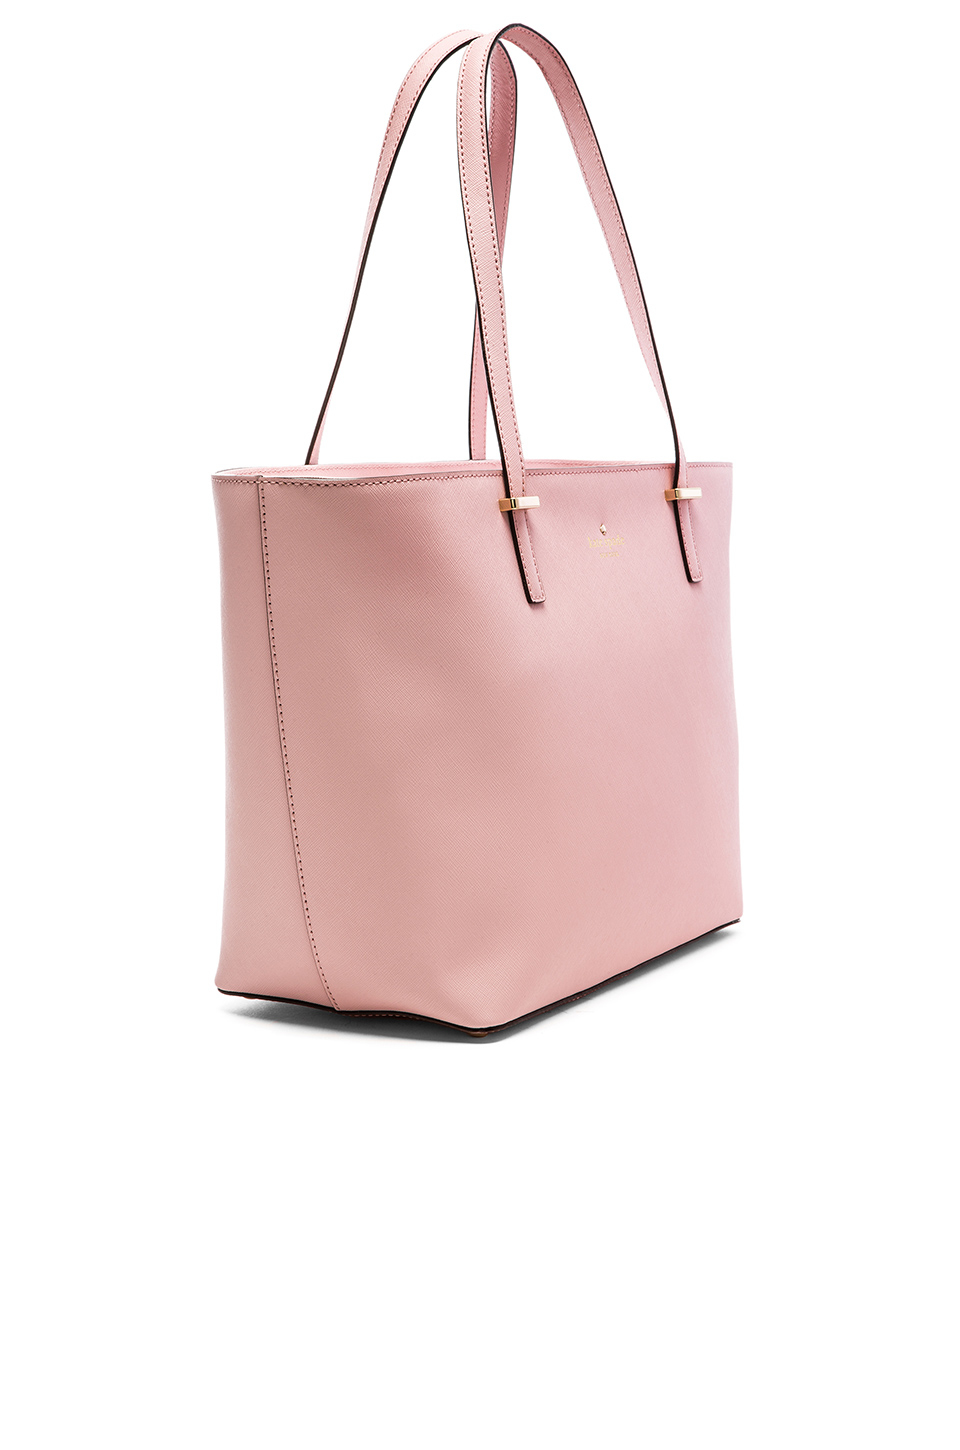 Lyst - Kate Spade New York Small Harmony Tote in Pink